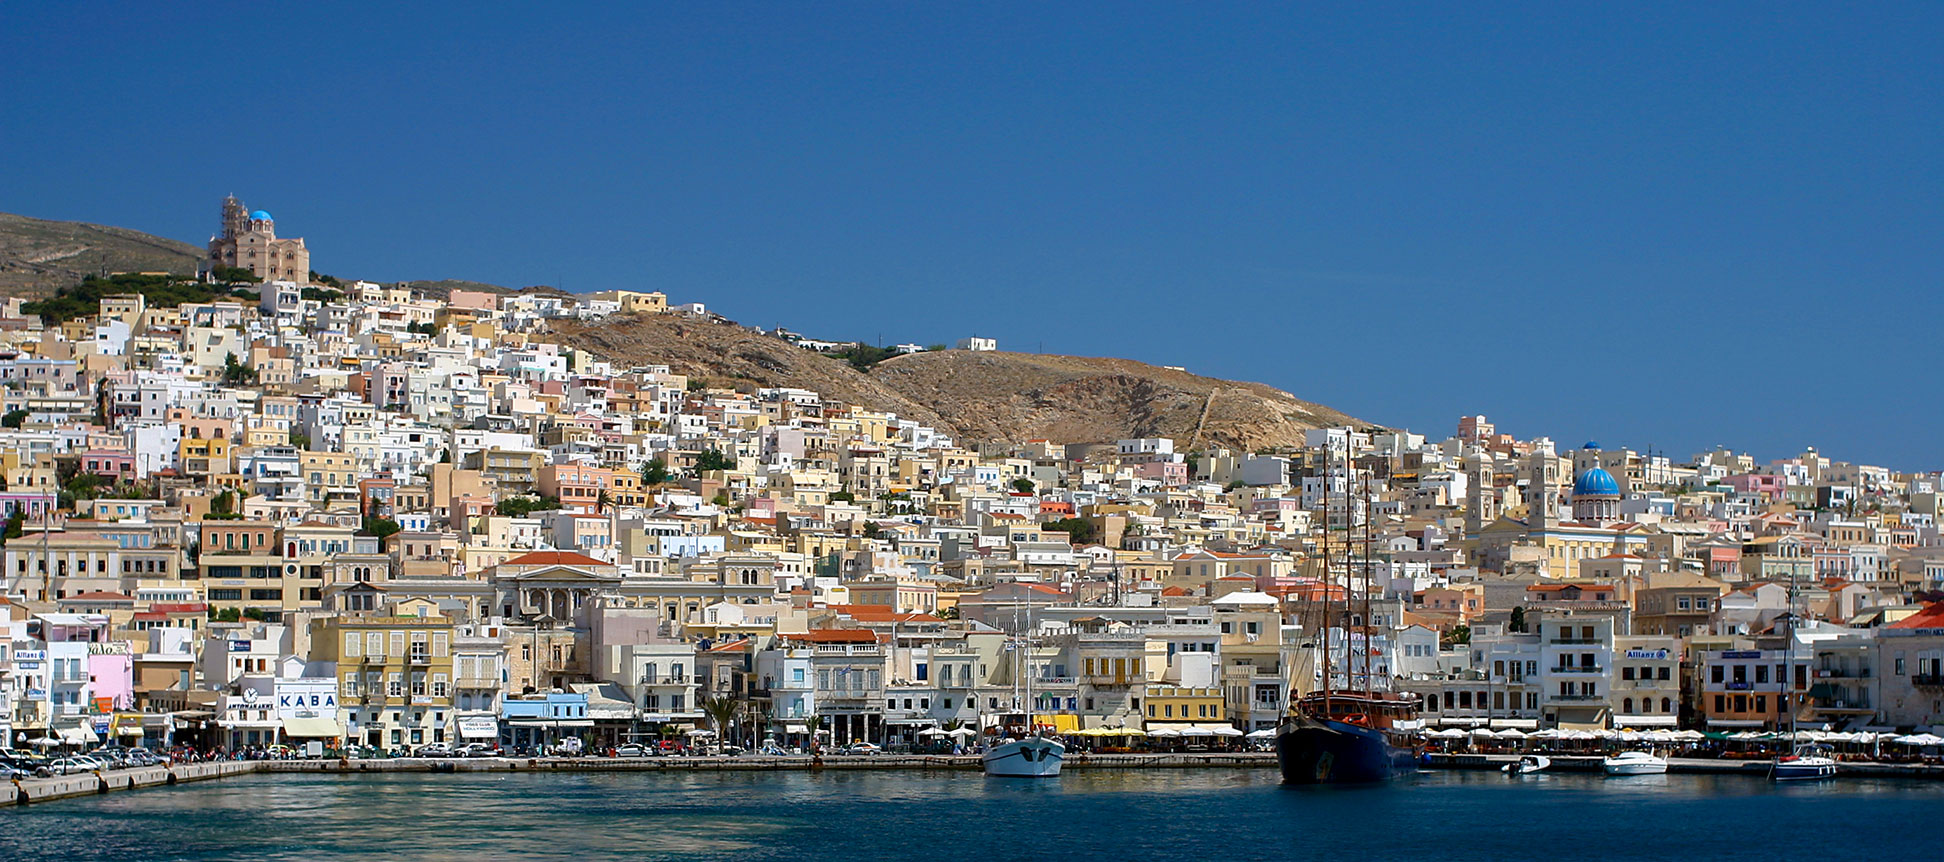 The harbour of Ermoupoli, the capital of the South Aegean, Greece.